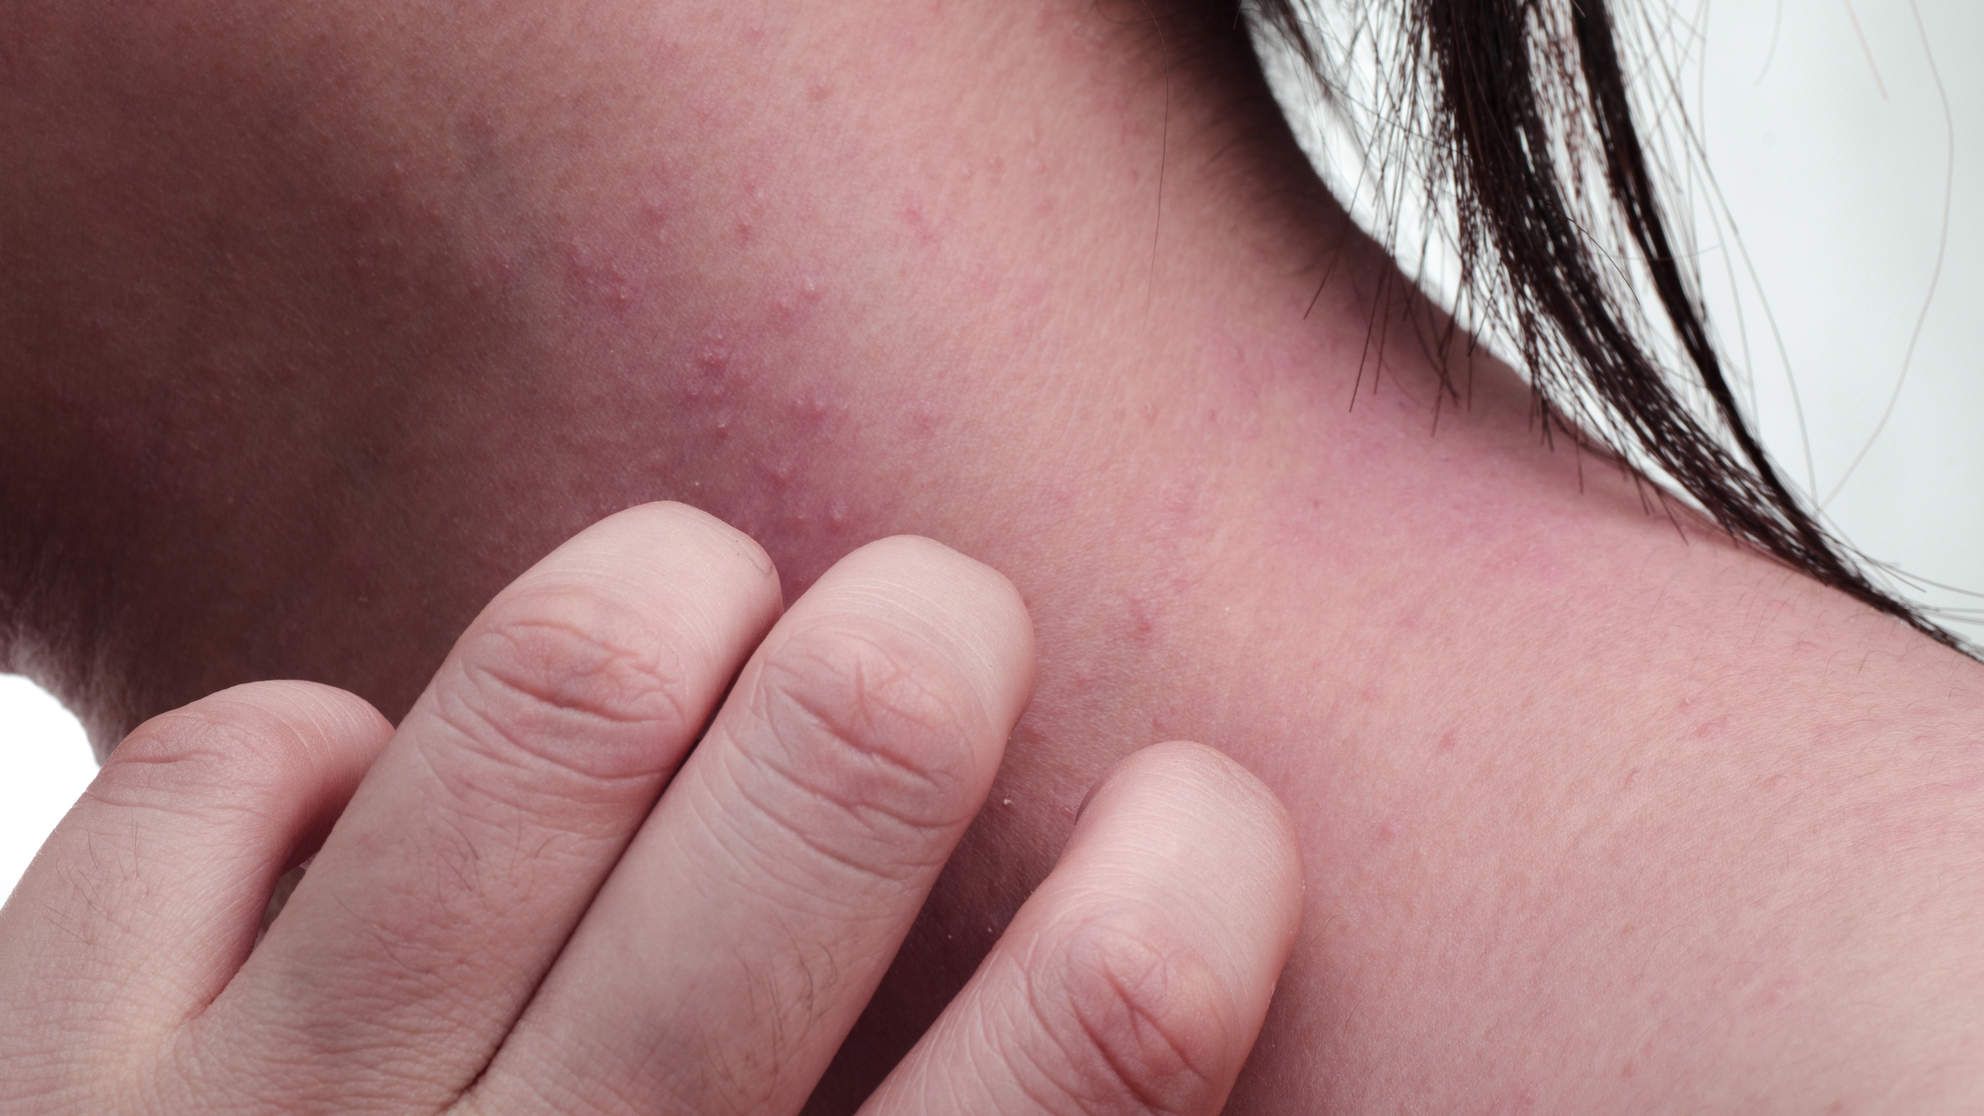 Eczema Causes: What to Do If You Have Dry, Itchy Skin